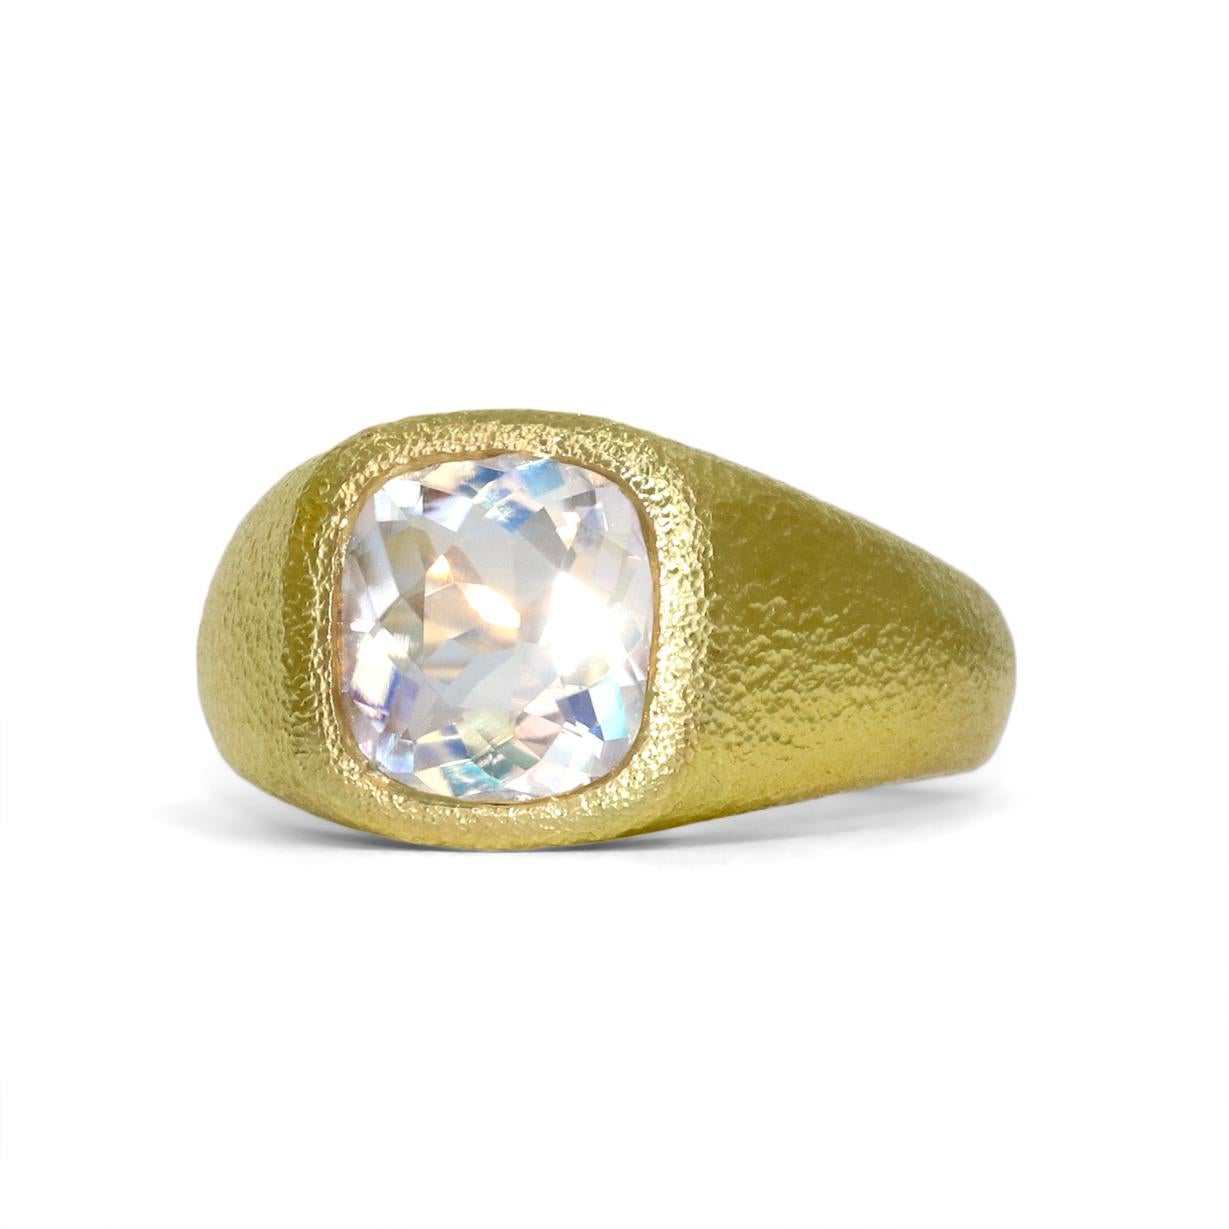 One of a Kind Ring handcrafted by acclaimed jewelry maker Devta Doolan in the artist's signature finished 18k yellow gold showcasing a magical faceted rainbow moonstone with primary blue/violet adularescence complemented with rainbow flash and